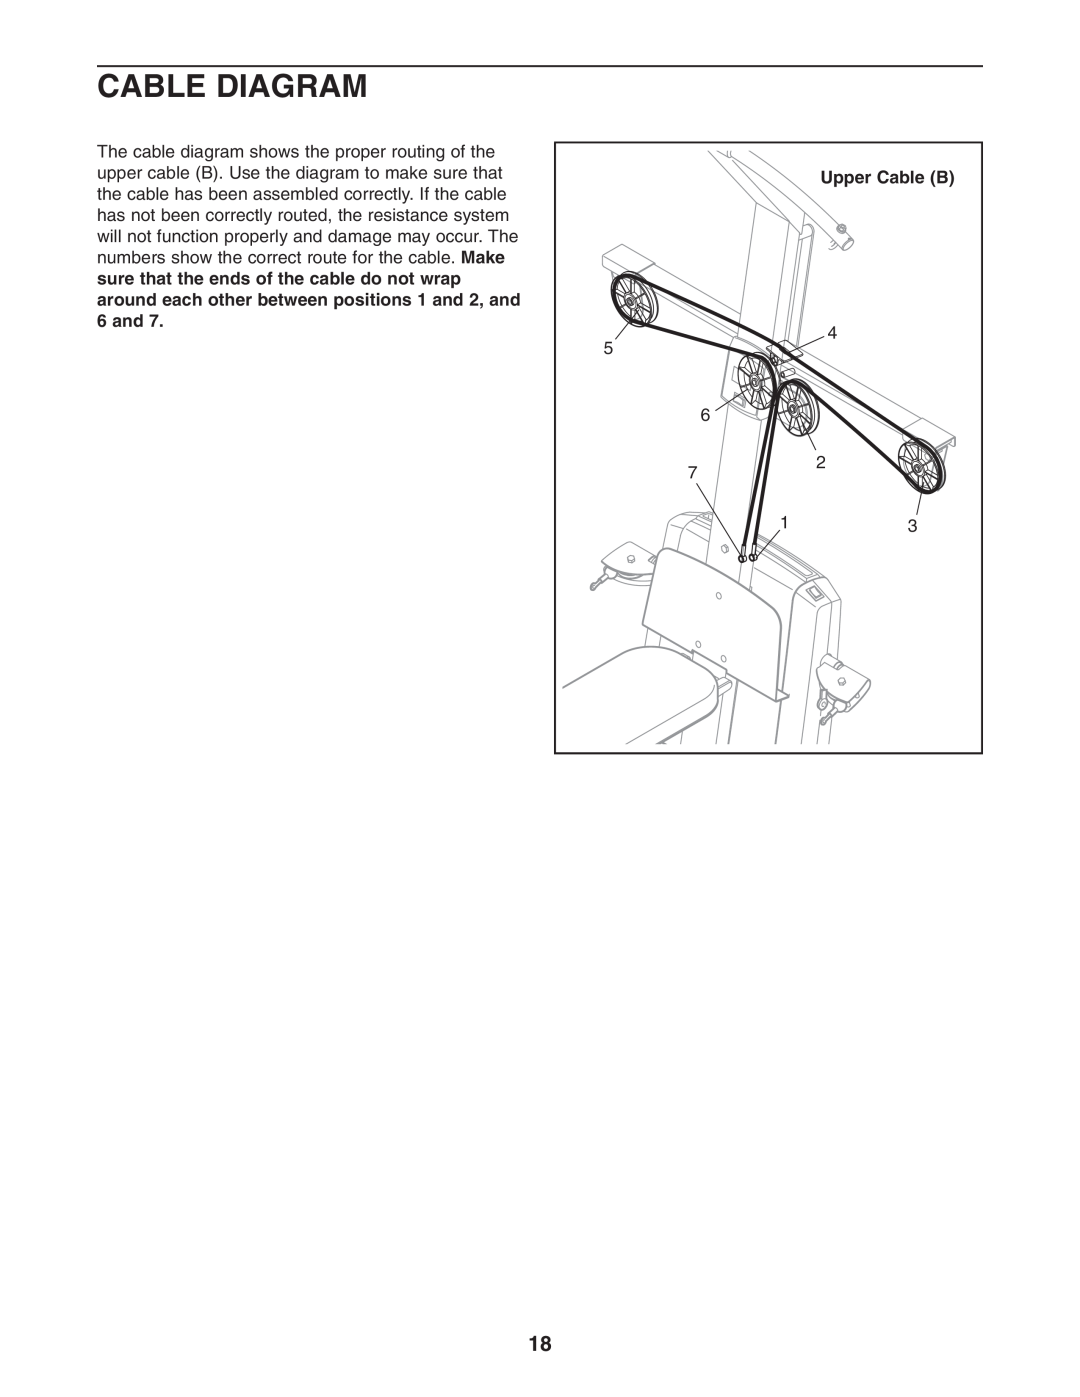 Weider WESY68632 user manual Cable Diagram, Upper Cable B 